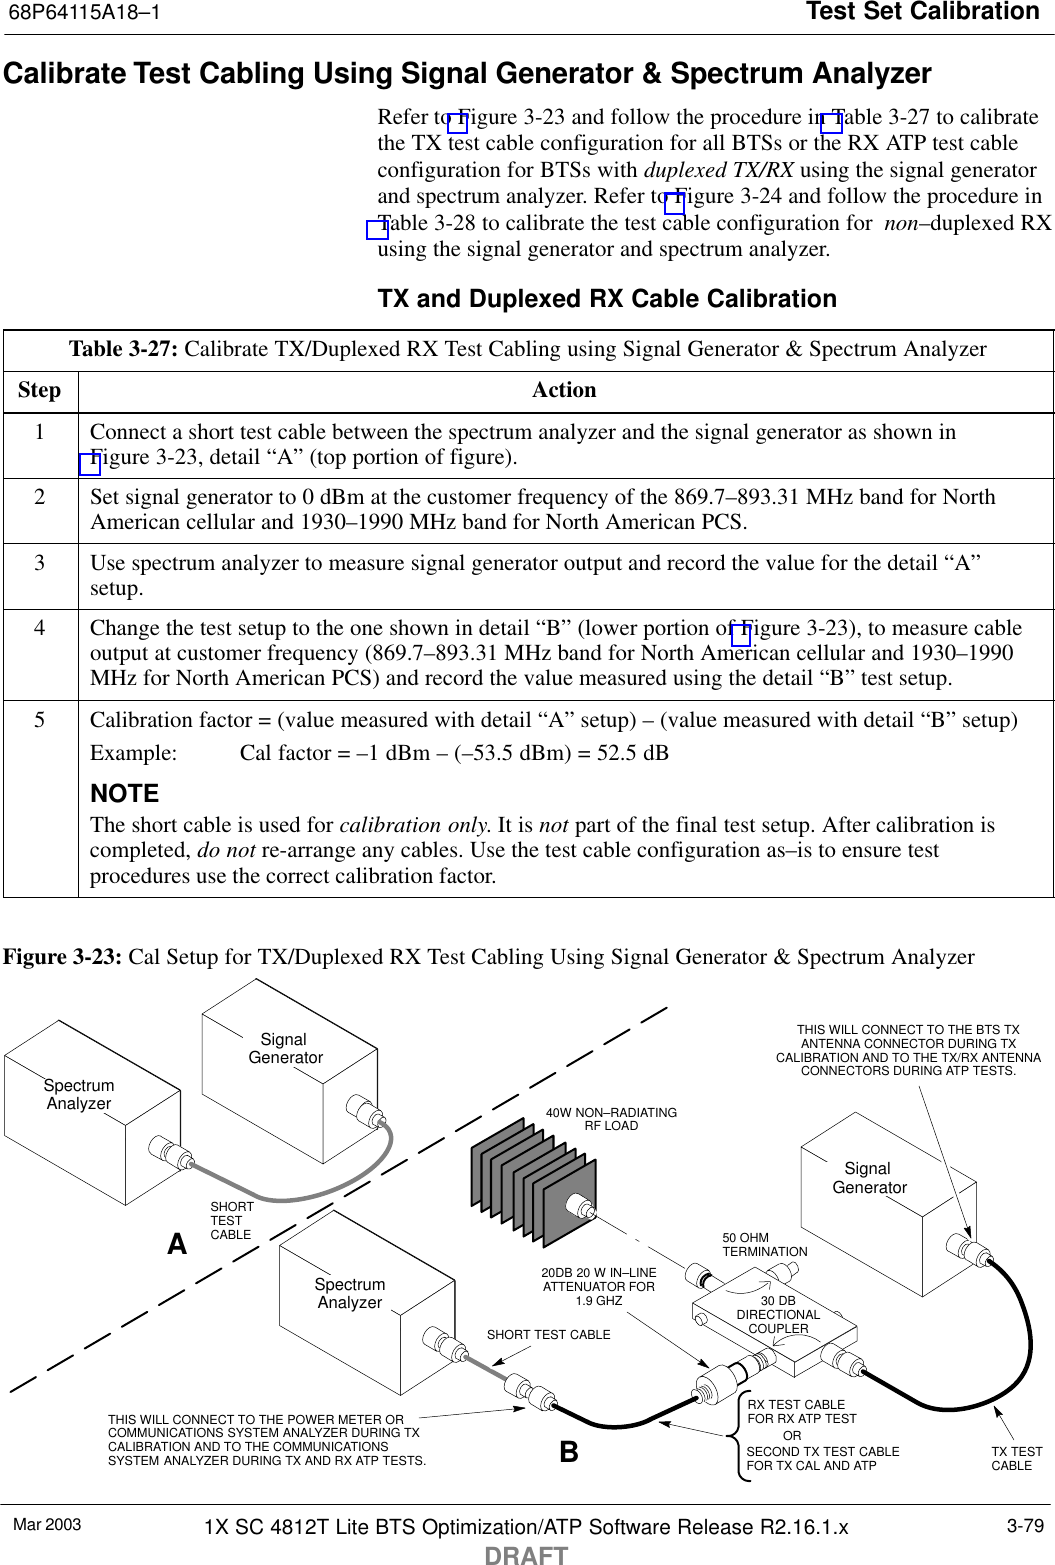 Test Set Calibration68P64115A18–1Mar 2003 1X SC 4812T Lite BTS Optimization/ATP Software Release R2.16.1.xDRAFT3-79Calibrate Test Cabling Using Signal Generator &amp; Spectrum AnalyzerRefer to Figure 3-23 and follow the procedure in Table 3-27 to calibratethe TX test cable configuration for all BTSs or the RX ATP test cableconfiguration for BTSs with duplexed TX/RX using the signal generatorand spectrum analyzer. Refer to Figure 3-24 and follow the procedure inTable 3-28 to calibrate the test cable configuration for  non–duplexed RXusing the signal generator and spectrum analyzer.TX and Duplexed RX Cable CalibrationTable 3-27: Calibrate TX/Duplexed RX Test Cabling using Signal Generator &amp; Spectrum AnalyzerStep Action1Connect a short test cable between the spectrum analyzer and the signal generator as shown inFigure 3-23, detail “A” (top portion of figure).2Set signal generator to 0 dBm at the customer frequency of the 869.7–893.31 MHz band for NorthAmerican cellular and 1930–1990 MHz band for North American PCS.3Use spectrum analyzer to measure signal generator output and record the value for the detail “A”setup.4Change the test setup to the one shown in detail “B” (lower portion of Figure 3-23), to measure cableoutput at customer frequency (869.7–893.31 MHz band for North American cellular and 1930–1990MHz for North American PCS) and record the value measured using the detail “B” test setup.5Calibration factor = (value measured with detail “A” setup) – (value measured with detail “B” setup)Example:  Cal factor = –1 dBm – (–53.5 dBm) = 52.5 dBNOTEThe short cable is used for calibration only. It is not part of the final test setup. After calibration iscompleted, do not re-arrange any cables. Use the test cable configuration as–is to ensure testprocedures use the correct calibration factor. Figure 3-23: Cal Setup for TX/Duplexed RX Test Cabling Using Signal Generator &amp; Spectrum Analyzer50 OHMTERMINATION30 DBDIRECTIONALCOUPLERSpectrumAnalyzerSignal GeneratorASpectrumAnalyzer40W NON–RADIATINGRF LOADBSHORT TEST CABLESignal GeneratorTHIS WILL CONNECT TO THE POWER METER ORCOMMUNICATIONS SYSTEM ANALYZER DURING TXCALIBRATION AND TO THE COMMUNICATIONSSYSTEM ANALYZER DURING TX AND RX ATP TESTS.SHORTTESTCABLESECOND TX TEST CABLEFOR TX CAL AND ATP20DB 20 W IN–LINEATTENUATOR FOR1.9 GHZTHIS WILL CONNECT TO THE BTS TXANTENNA CONNECTOR DURING TXCALIBRATION AND TO THE TX/RX ANTENNACONNECTORS DURING ATP TESTS.TX TESTCABLERX TEST CABLEFOR RX ATP TESTOR